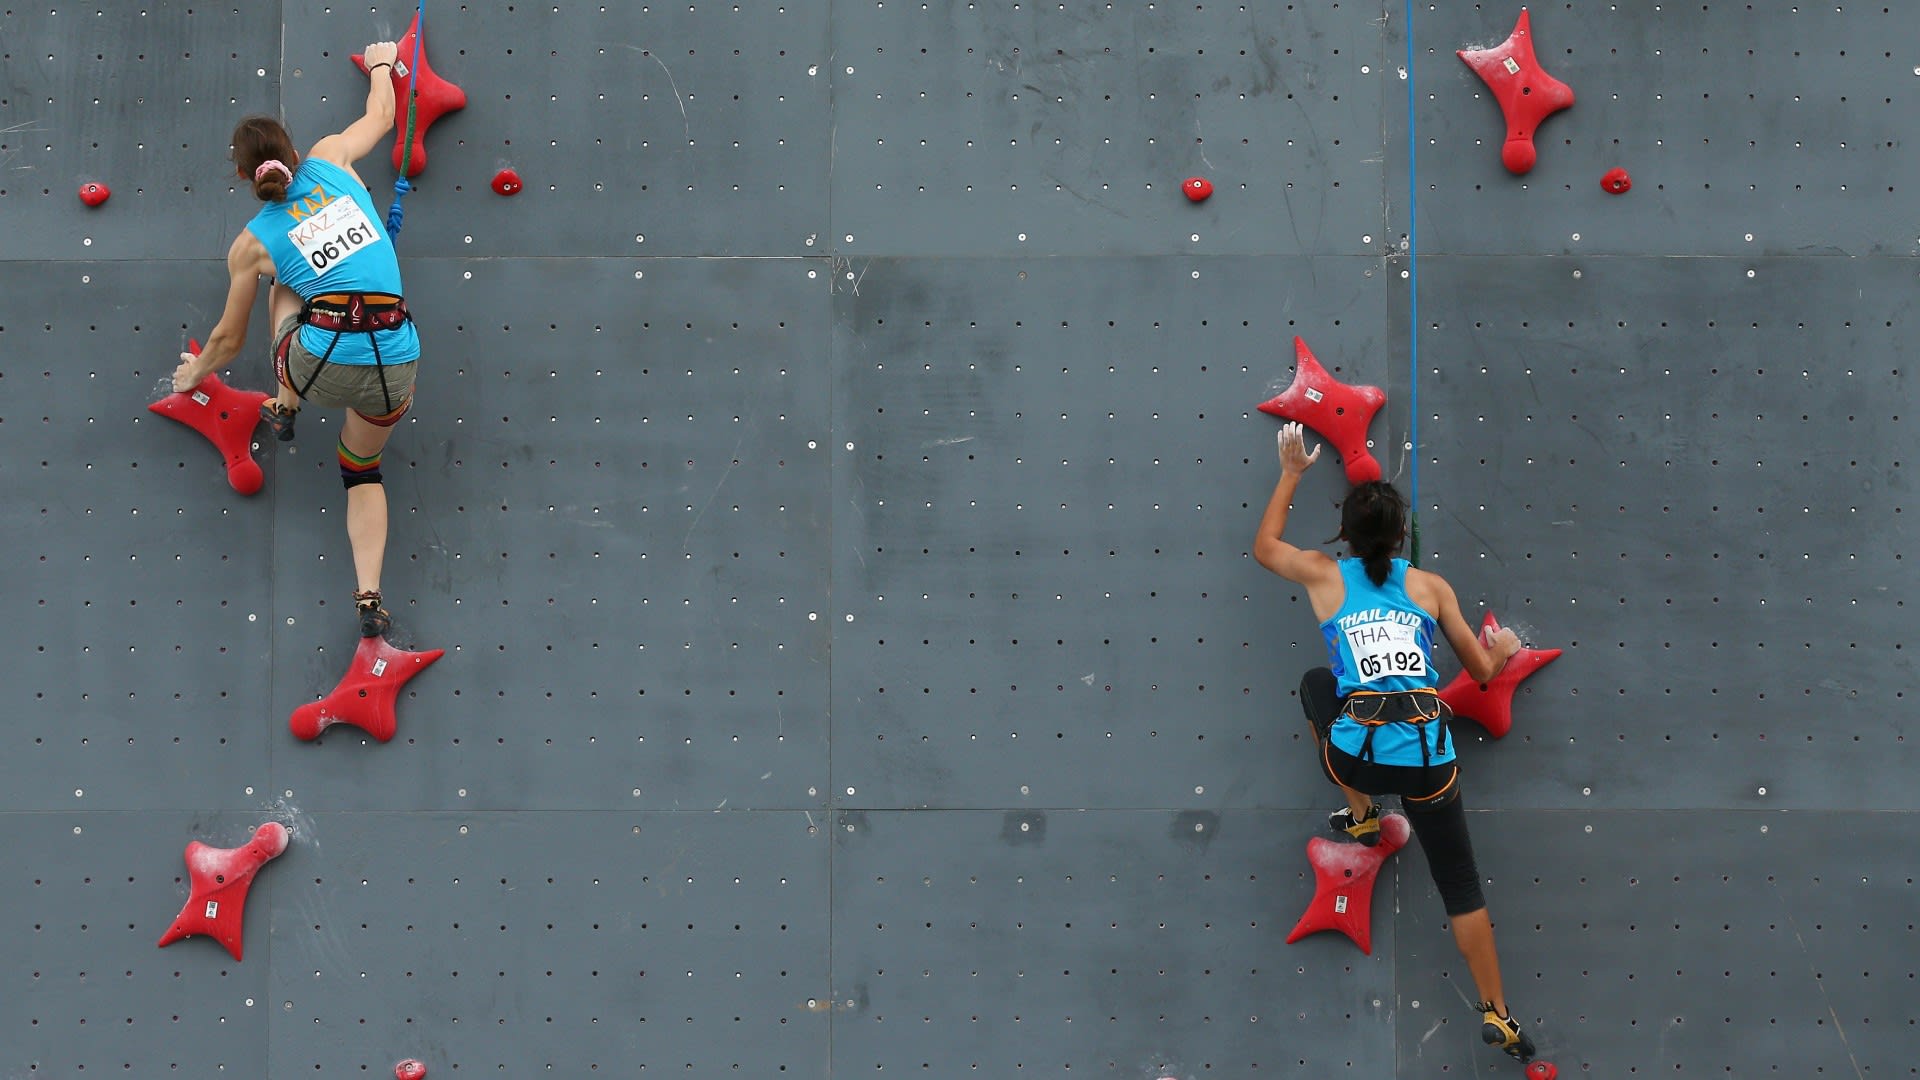 IFSC Climbing World Championship 2019 Everything you need to know